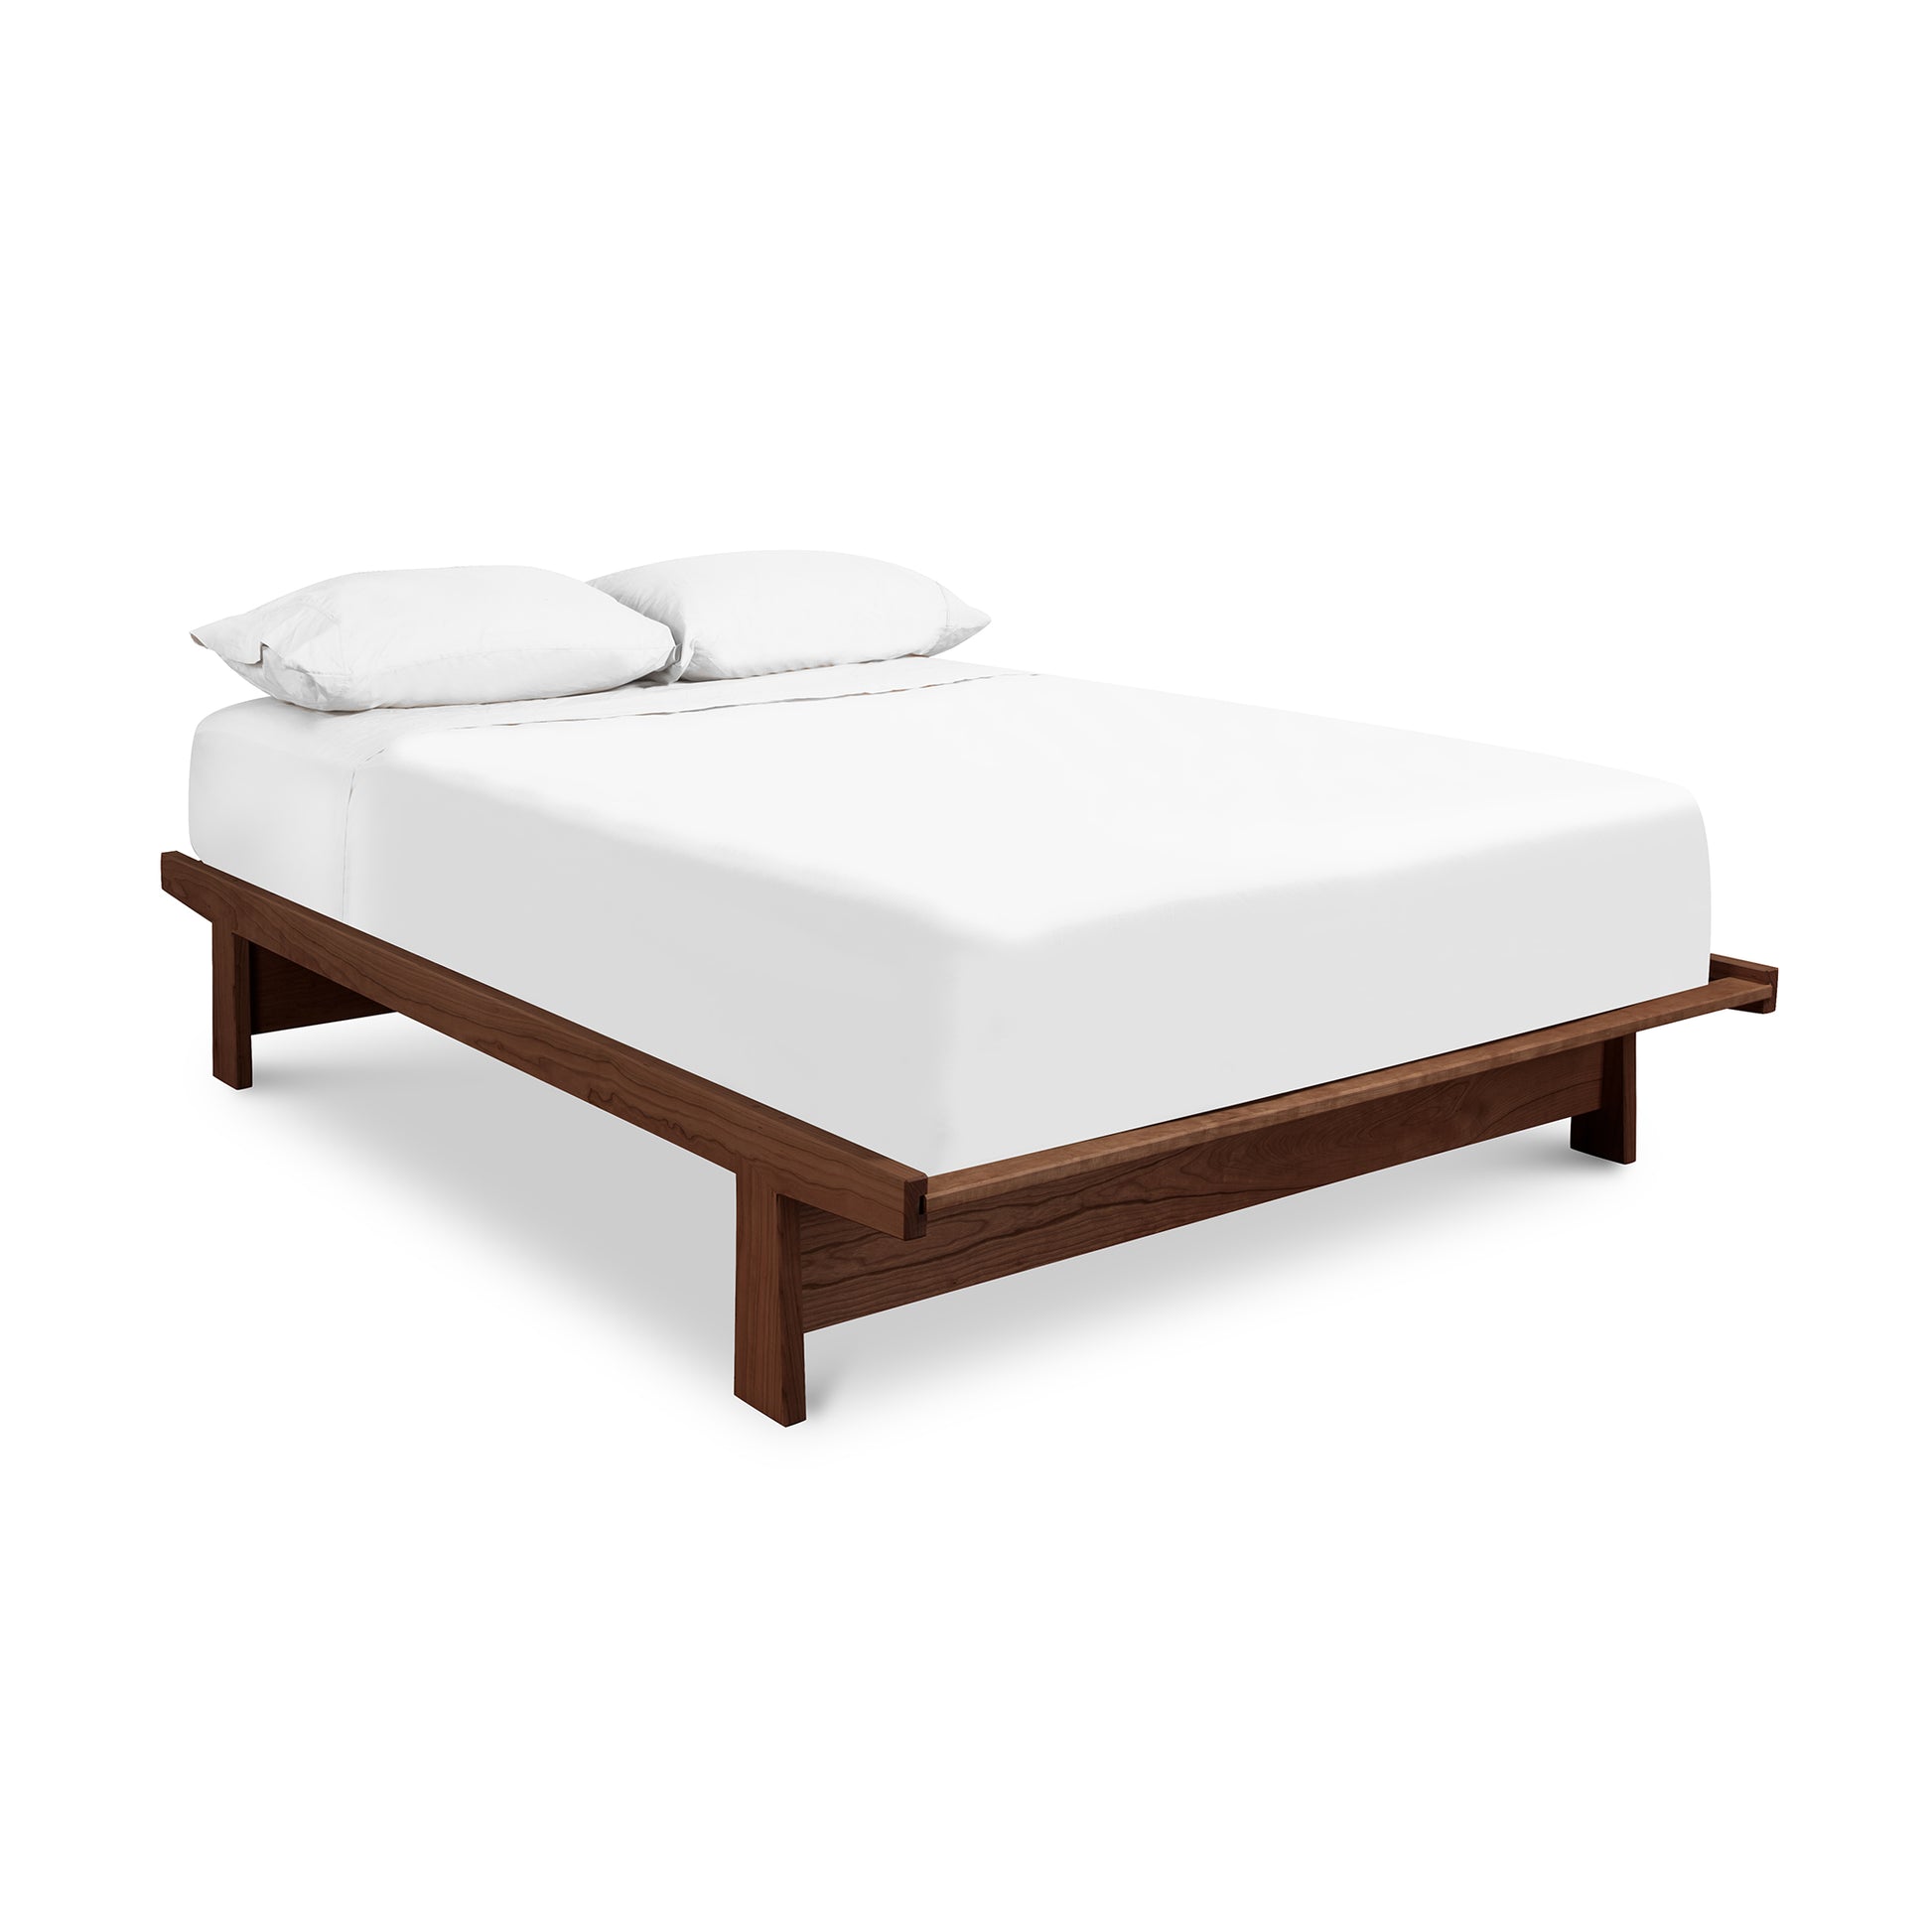 A Cherry Moon Dovetail Platform Bed by Maple Corner Woodworks with an eco-friendly oil finish, and a white mattress with two pillows, isolated on a white background.